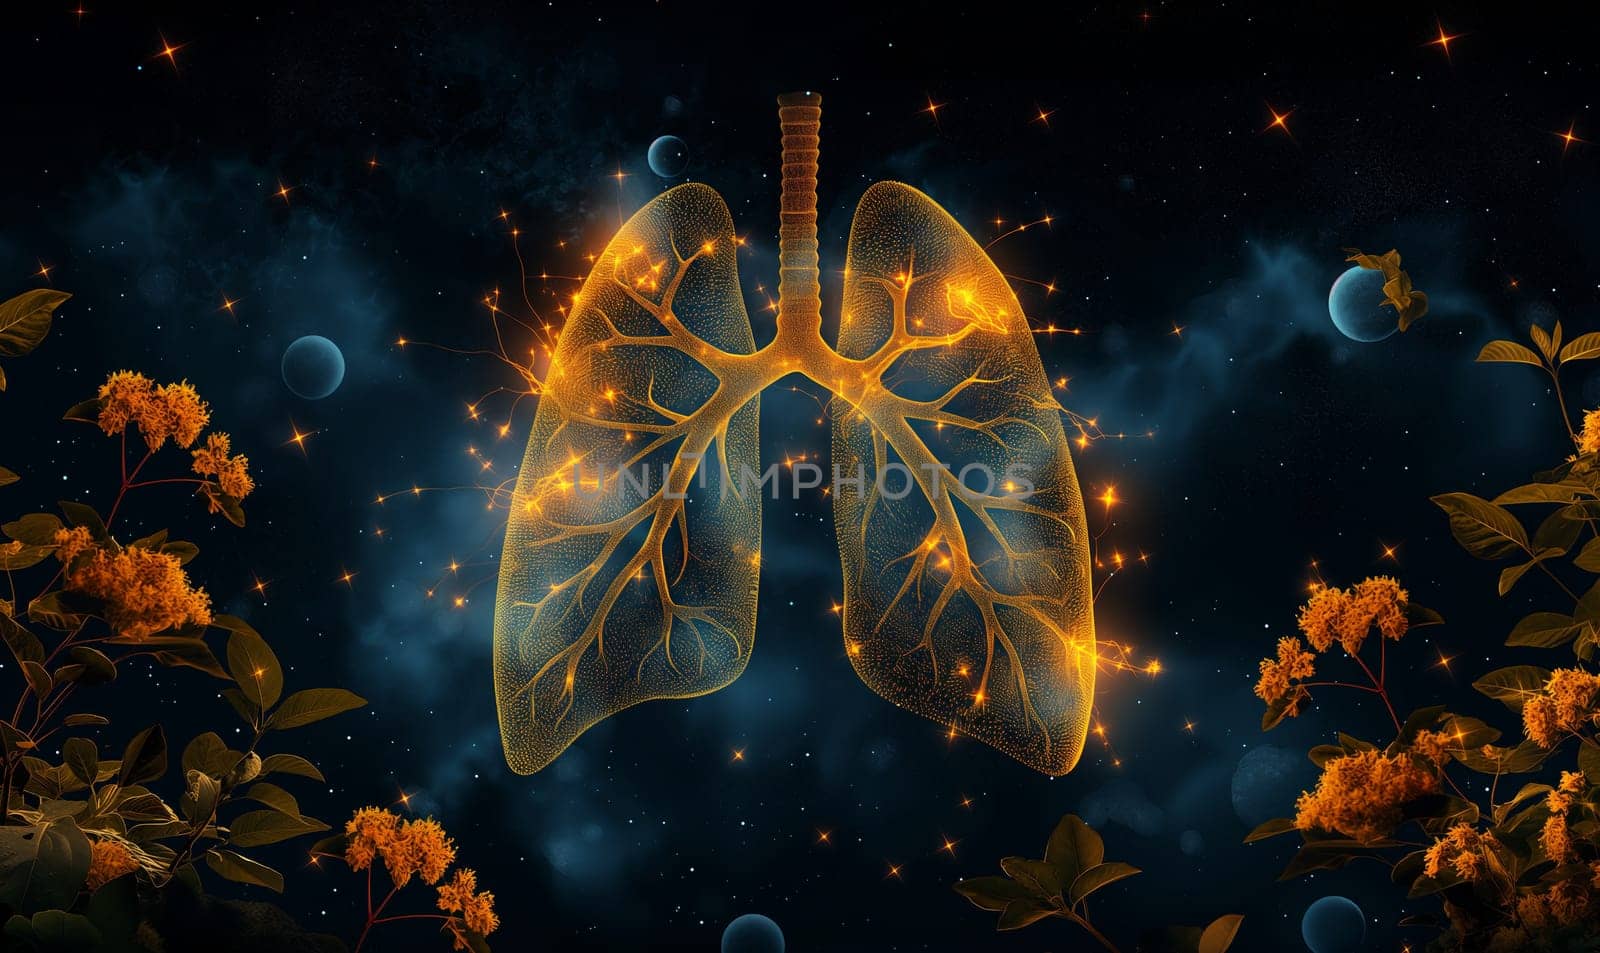 Human lungs on an abstract background. by Fischeron